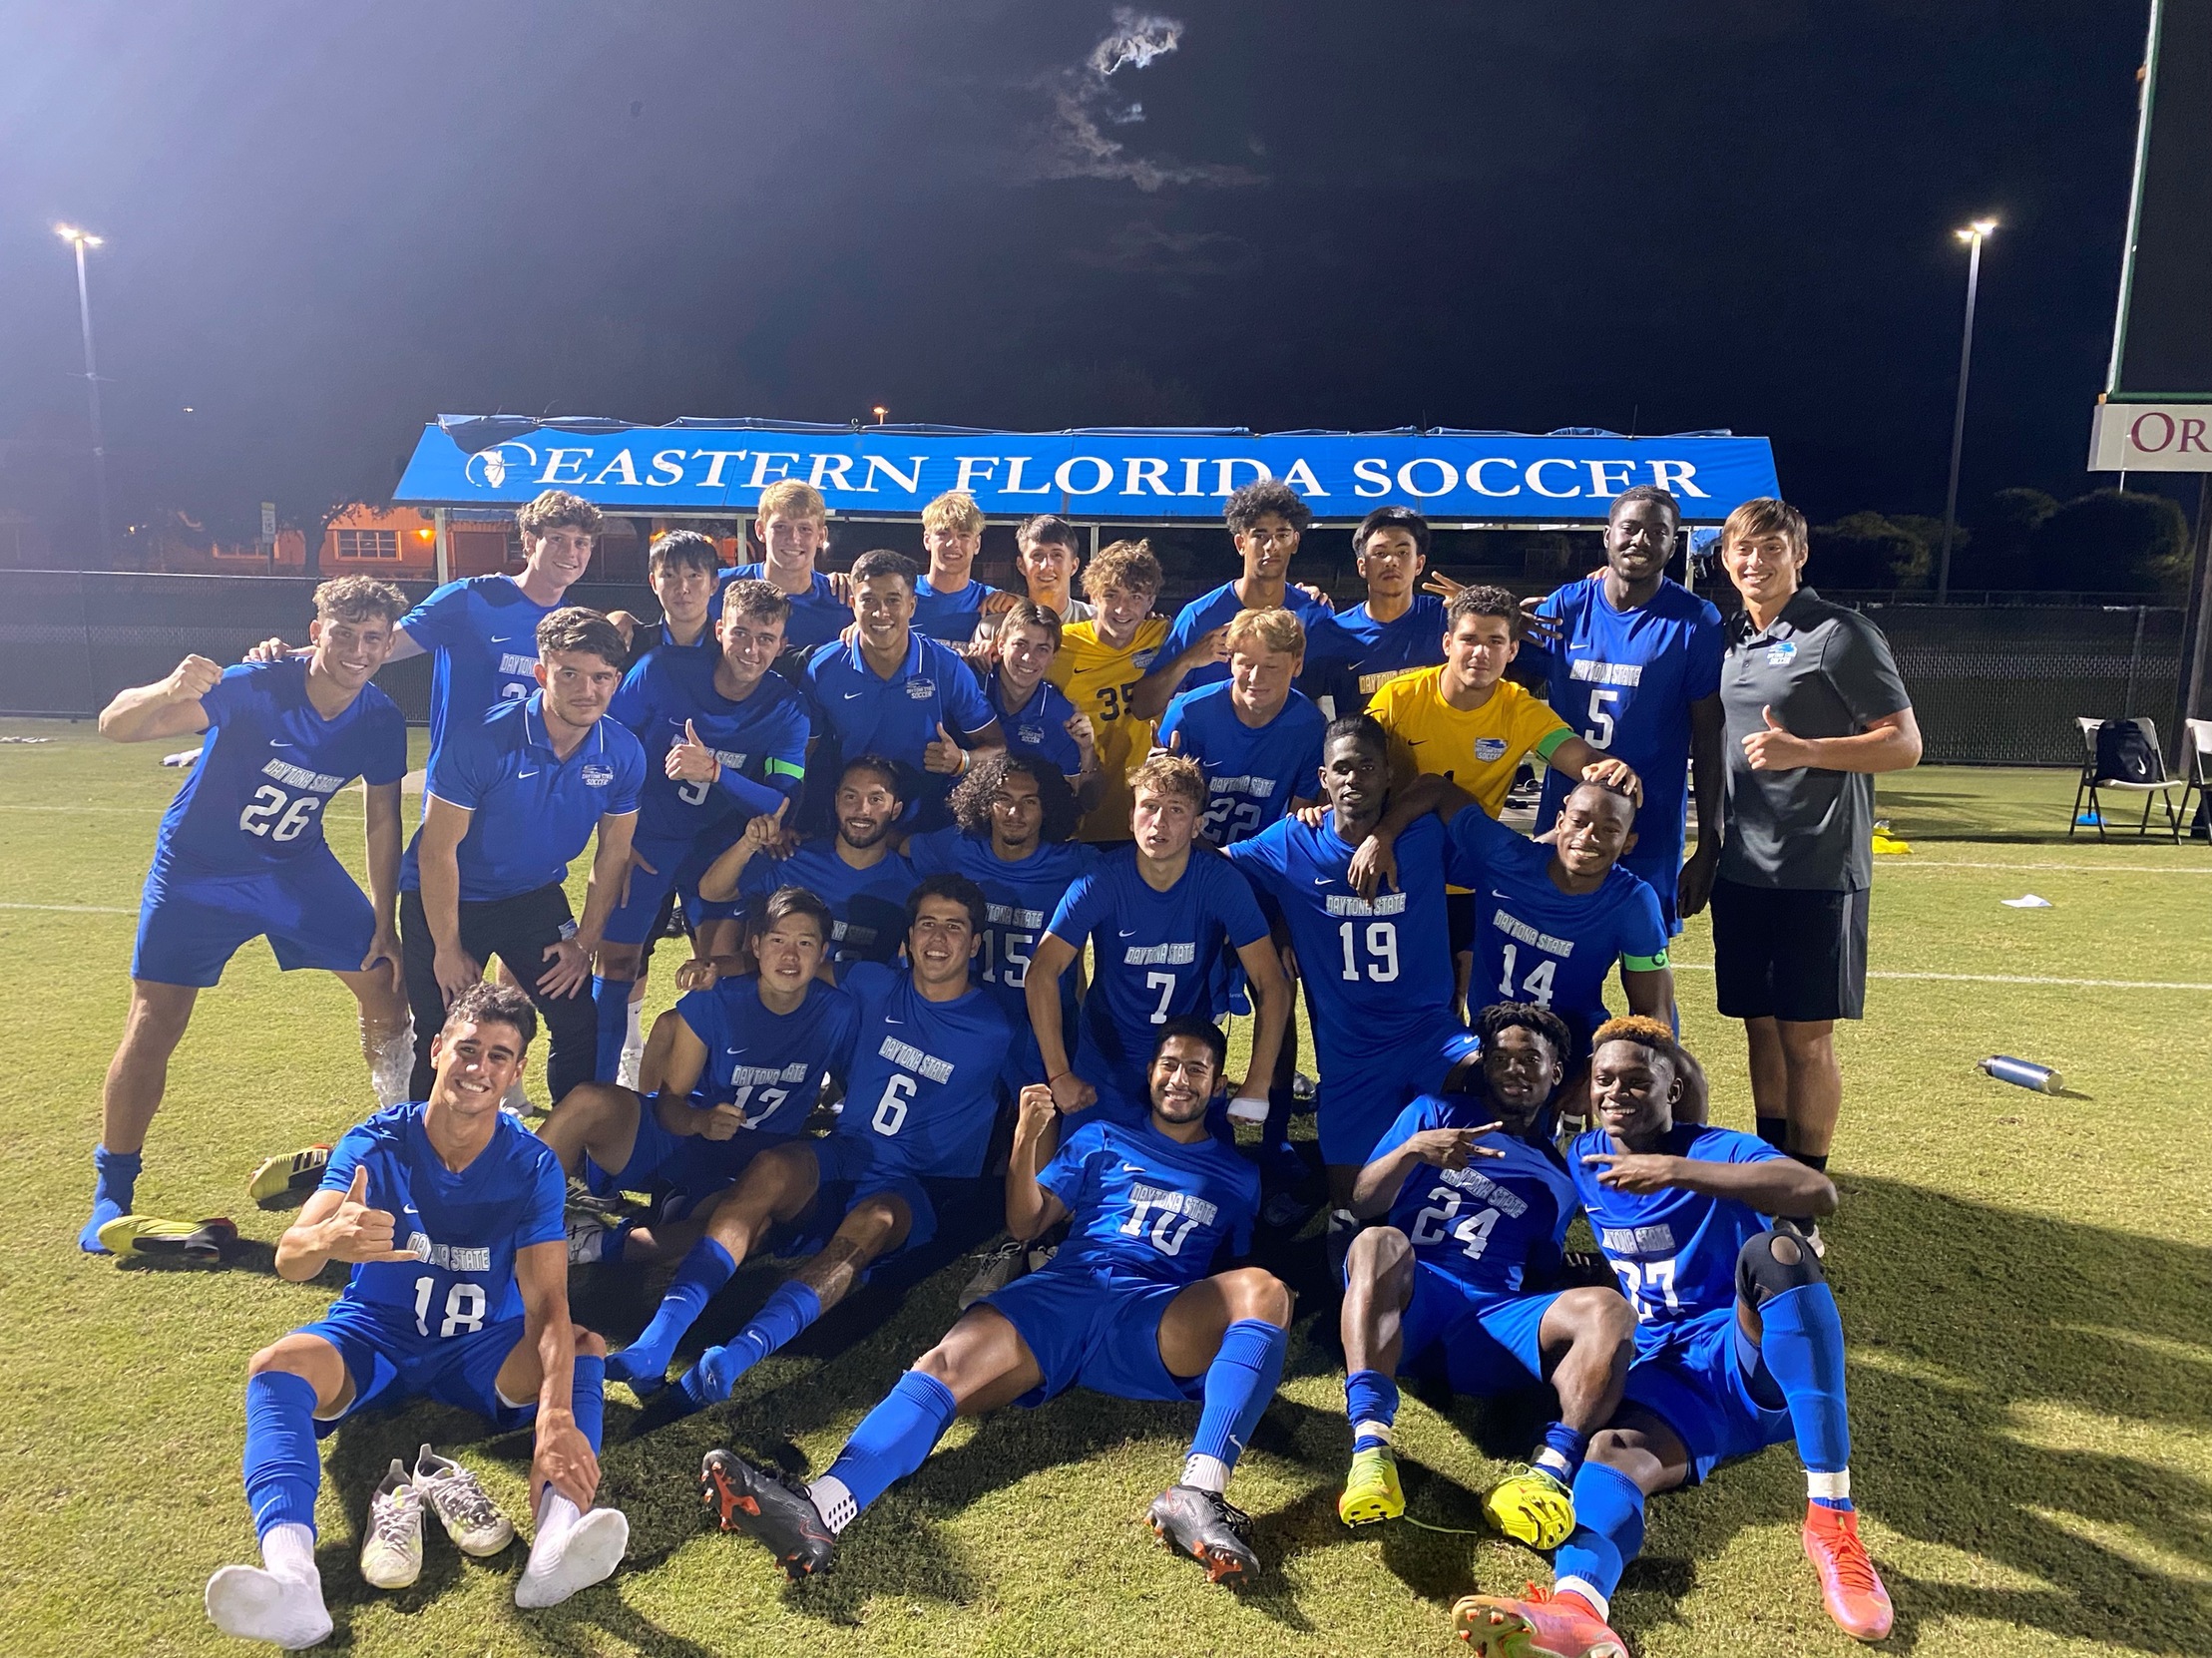 Falcons Defeat Eastern Florida State for Region 8 Championship